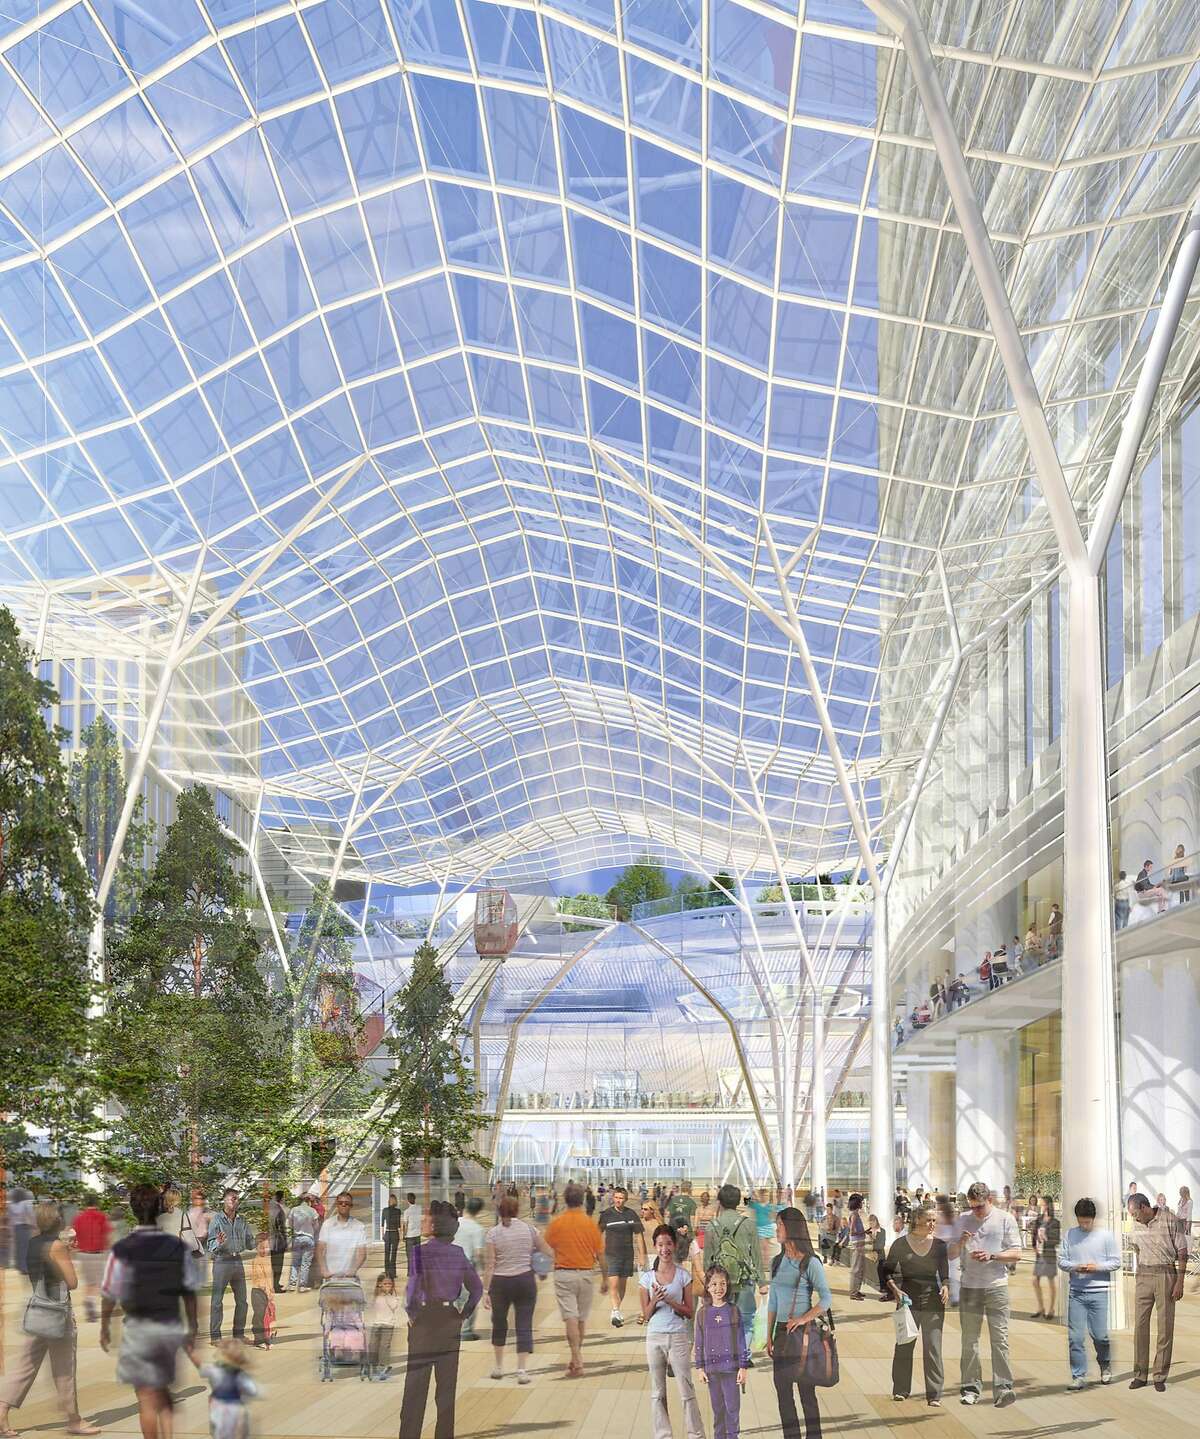 The original design for the plaza at Mission and Fremont streets, from the entry for the competition held by the Transbay Joint Powers Authority. The design team was Pelli Clarke Pelli Architects and PWP Landscape Architecture. Several elements, such as the canopy and second-floor retail, had been removed by the time the project was approved in 2012.